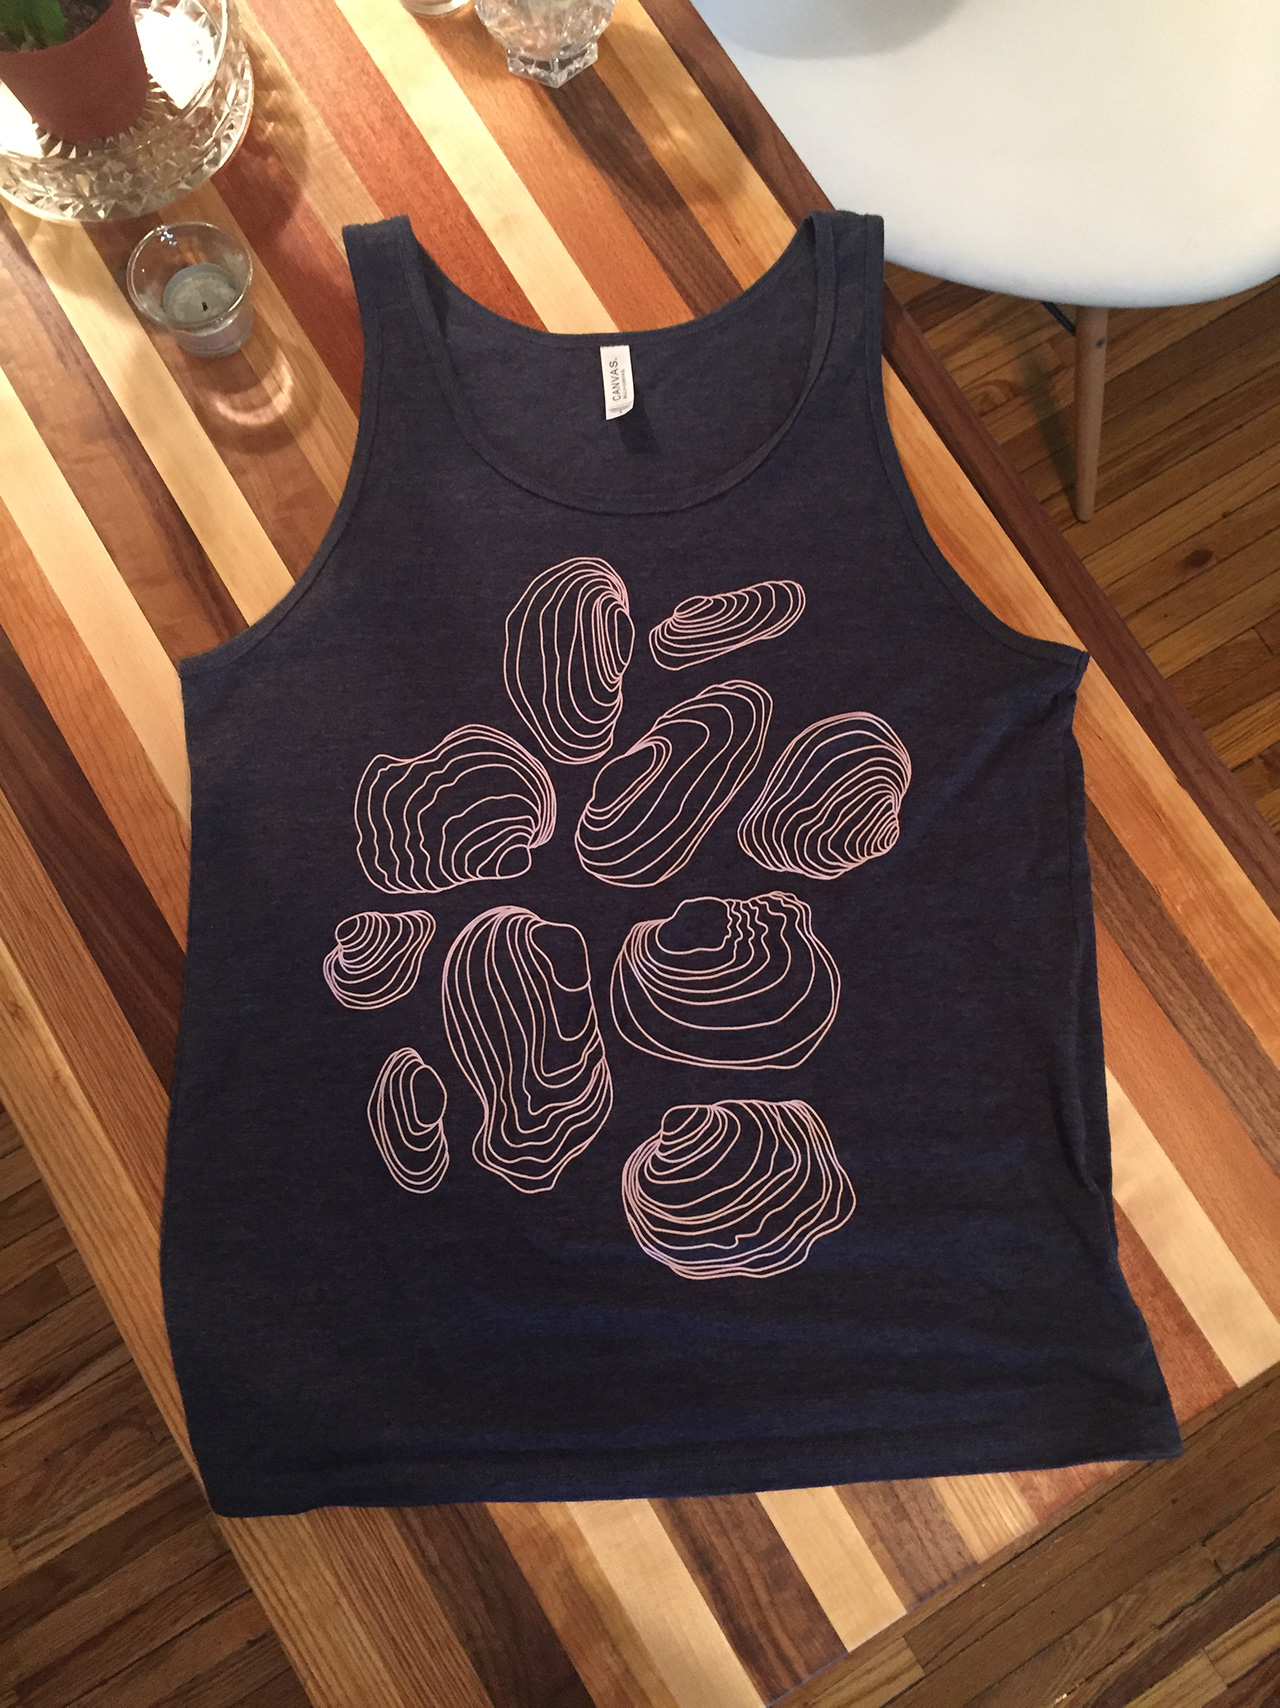 Sleeveless tee with mussels design